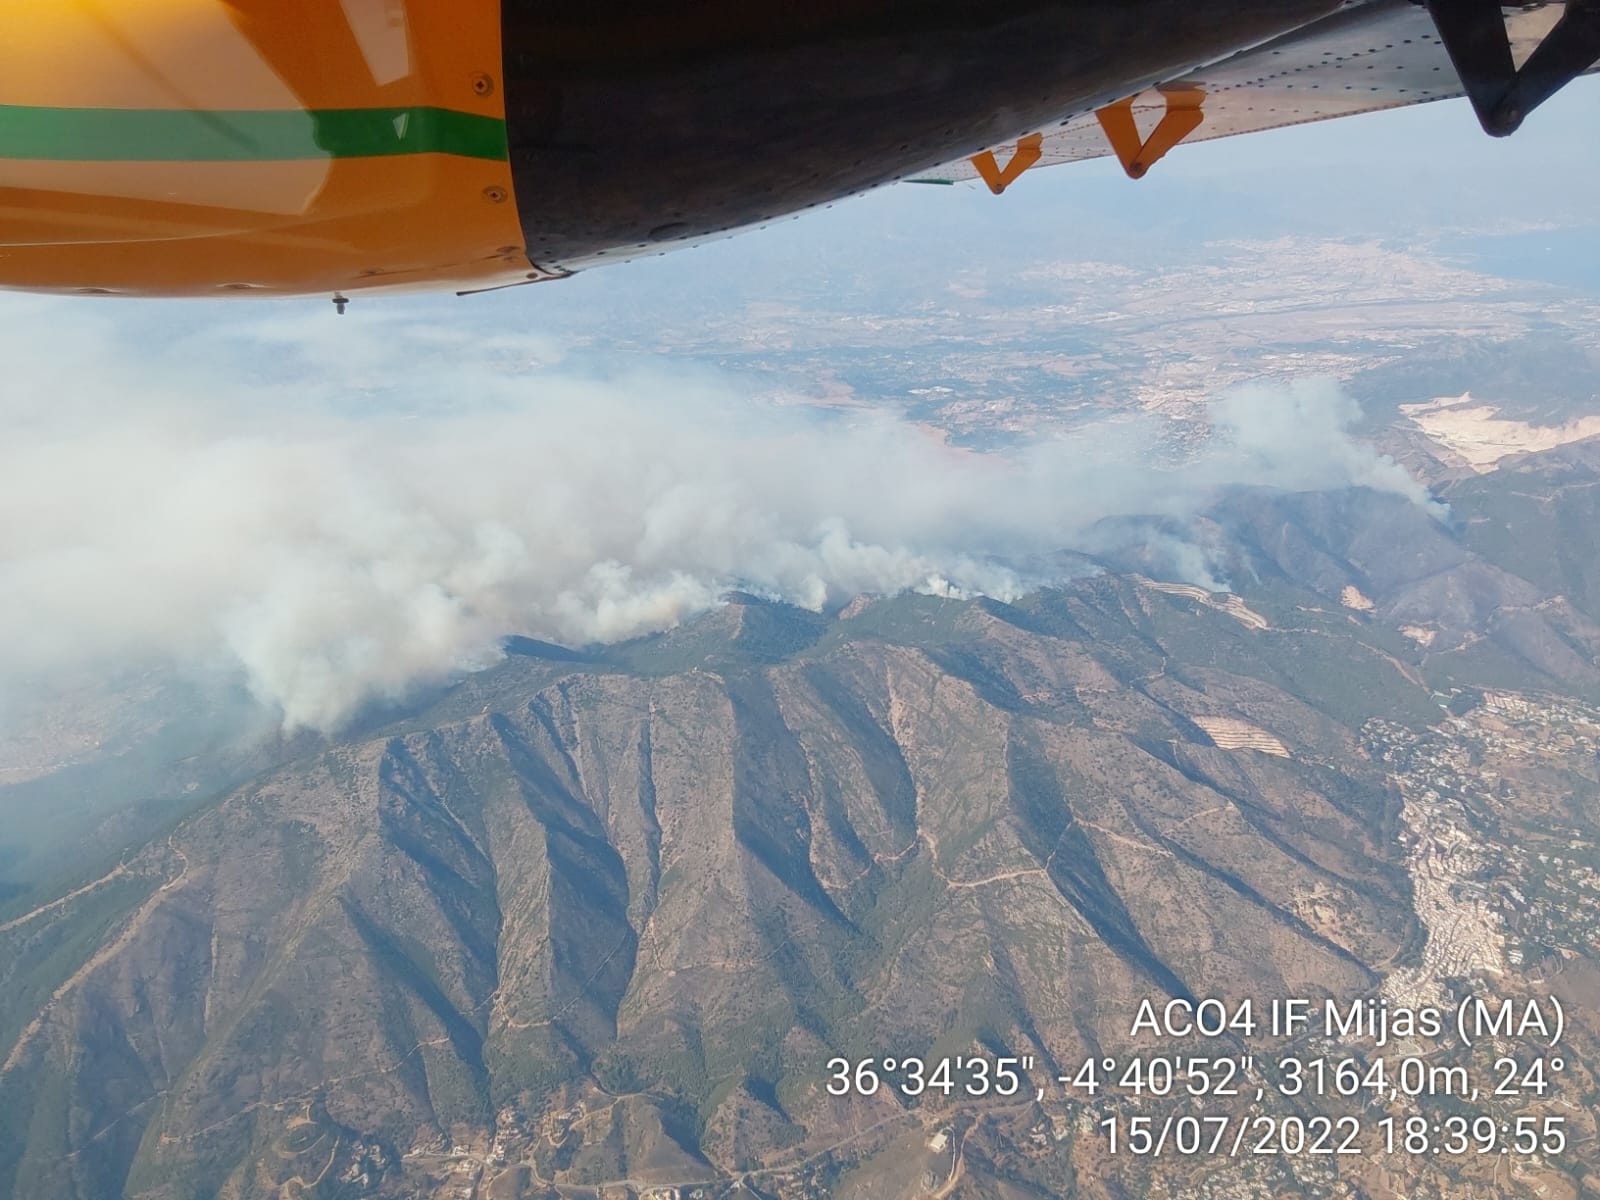 Photograph of the Alhaurín el Grande fire, as seen from the air.